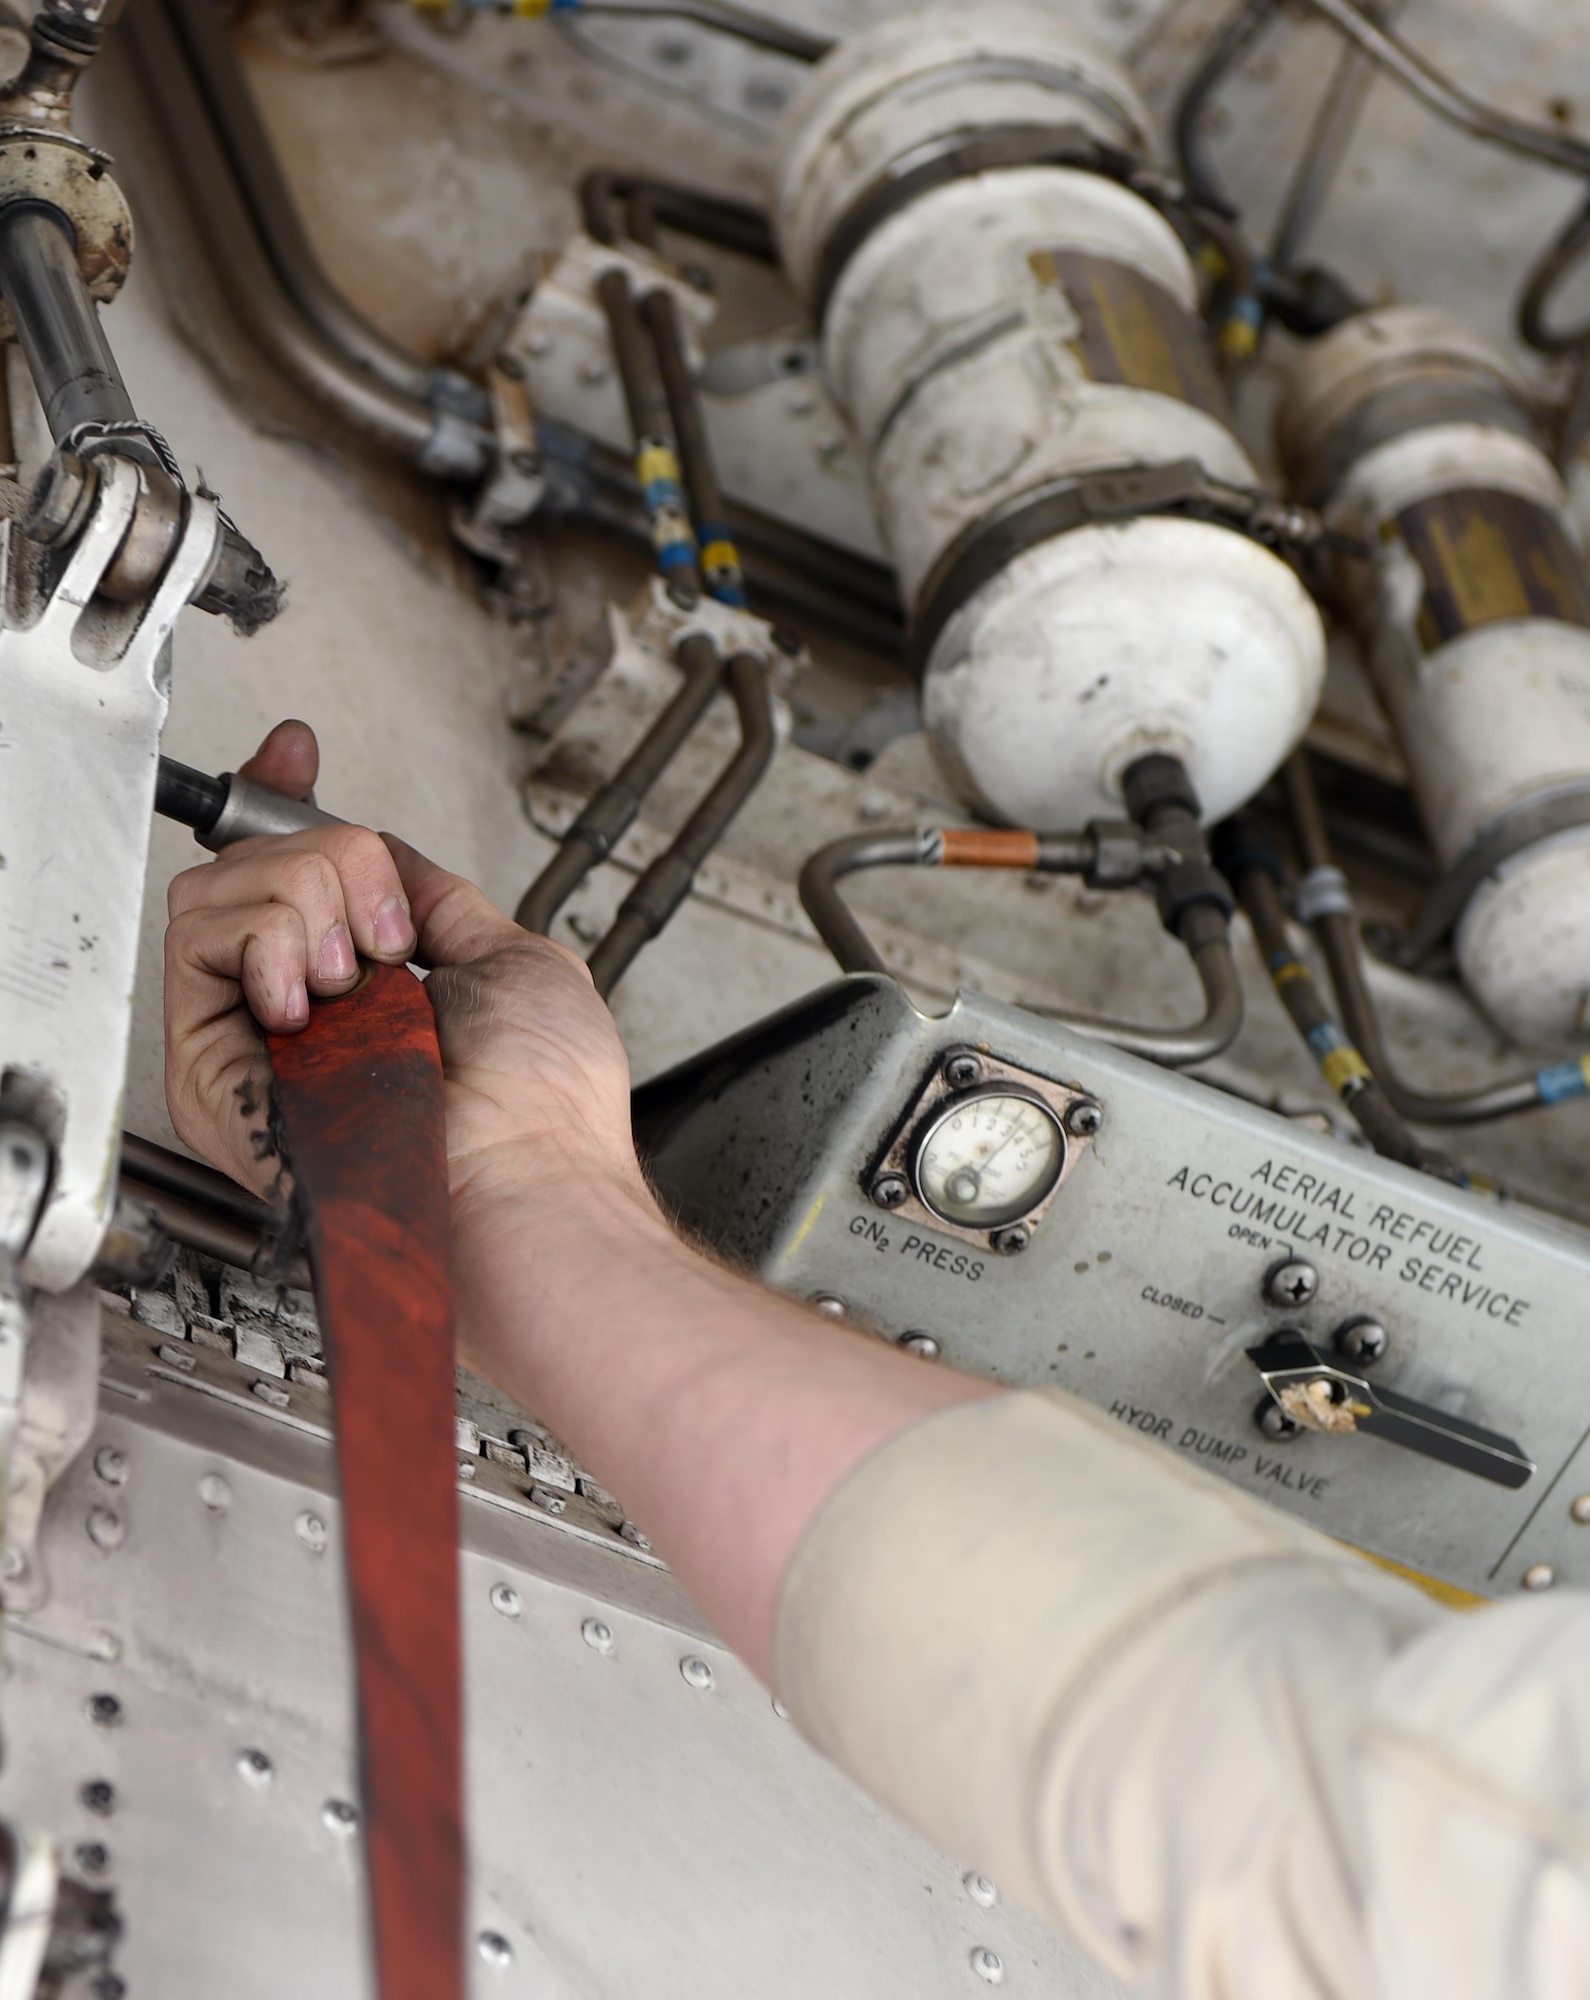 Senior Airman Jason Stach, a 28th Aircraft Maintenance Unit B-1B Lancer aircraft technician, places a safety pin in place to keep the front landing gear doors from closing during maintenance on one of the bombers May 3, 2016, at Dyess Air Force Base, Texas. In order to become a B-1 aircraft technician, Stach had to go through a four-month technical school. Two months of the school consisted of basic aircraft maintenance and terminology and the remainder was hands-on training here at Dyess. (U.S. Air Force photo/Senior Airman Alexander Guerrero)